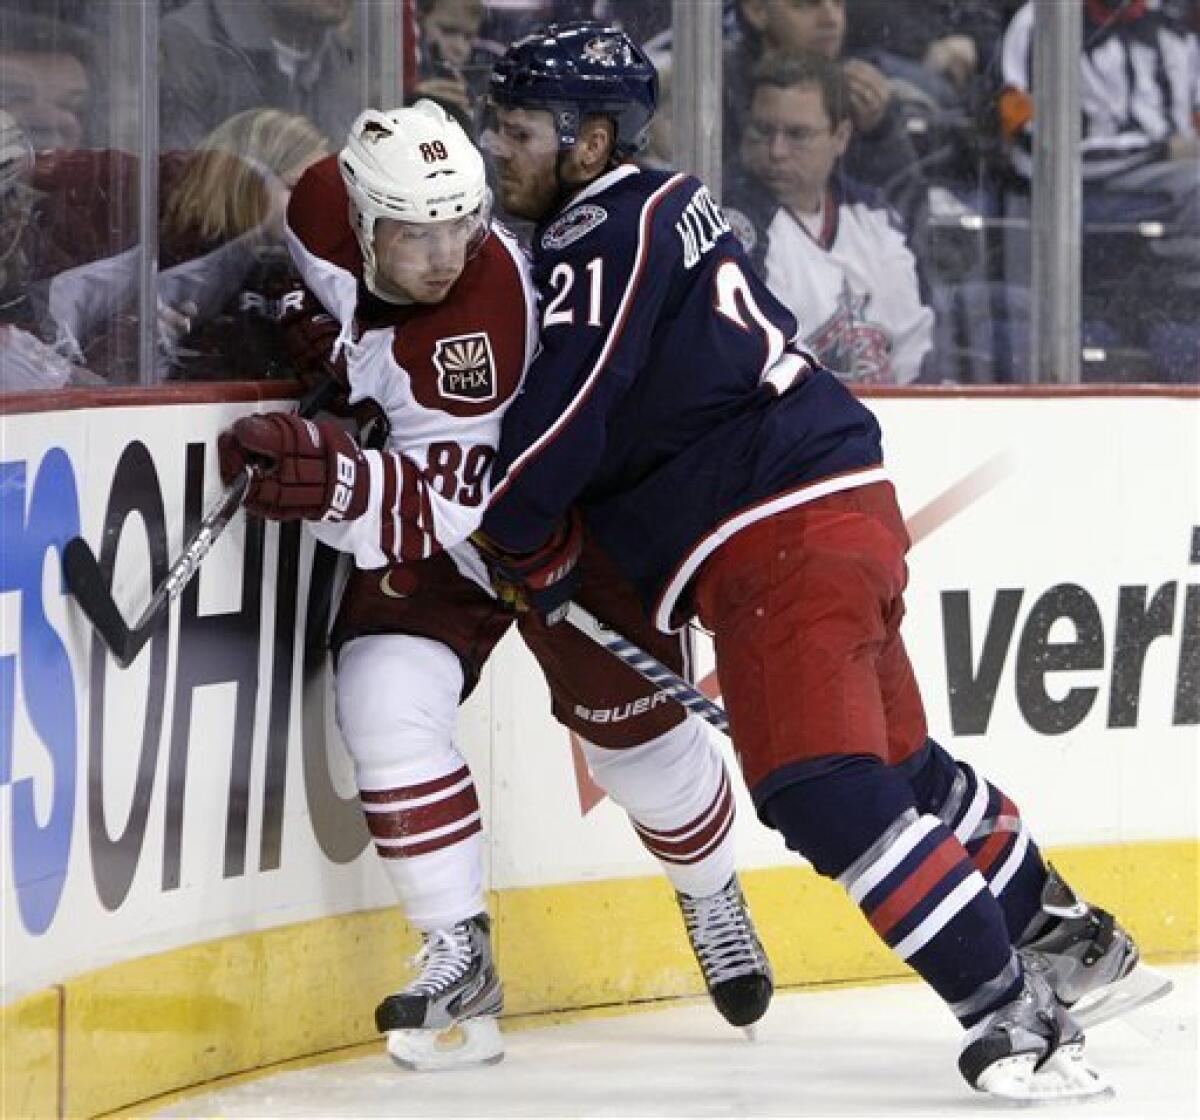 Blue Jackets will have Carter, Wisniewski together for 1st time